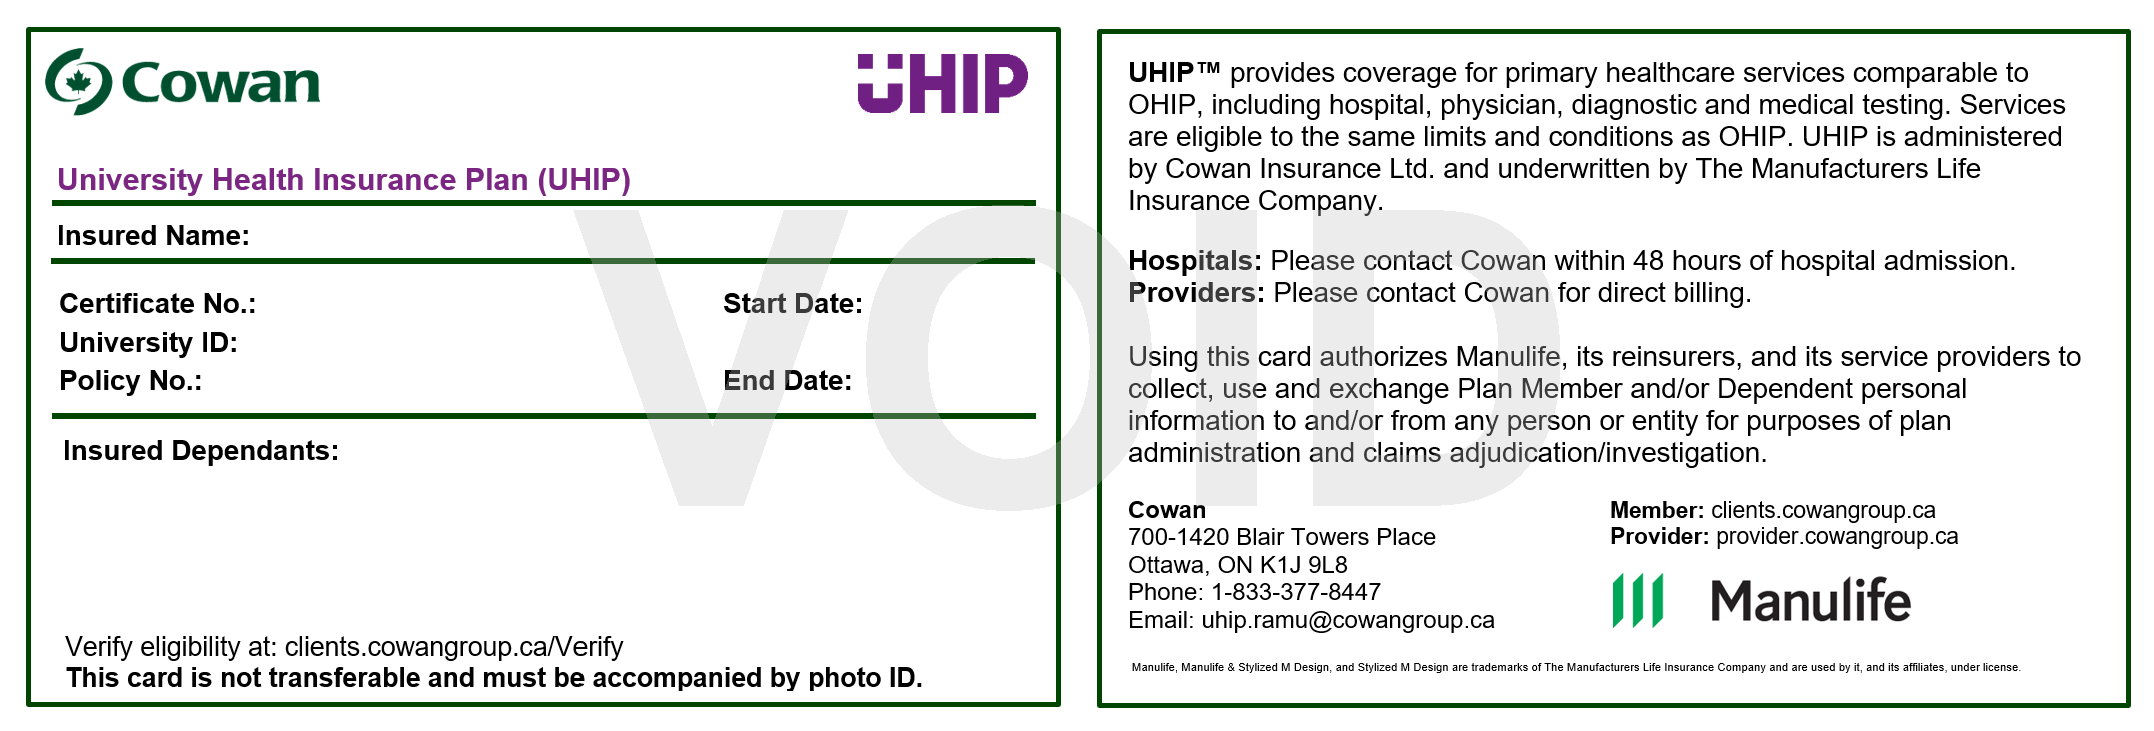 A Cowan UHIP insurance card that contains the students' insurance information on the left side, and general information about UHIP and the contact information for Cowan on the right side. 